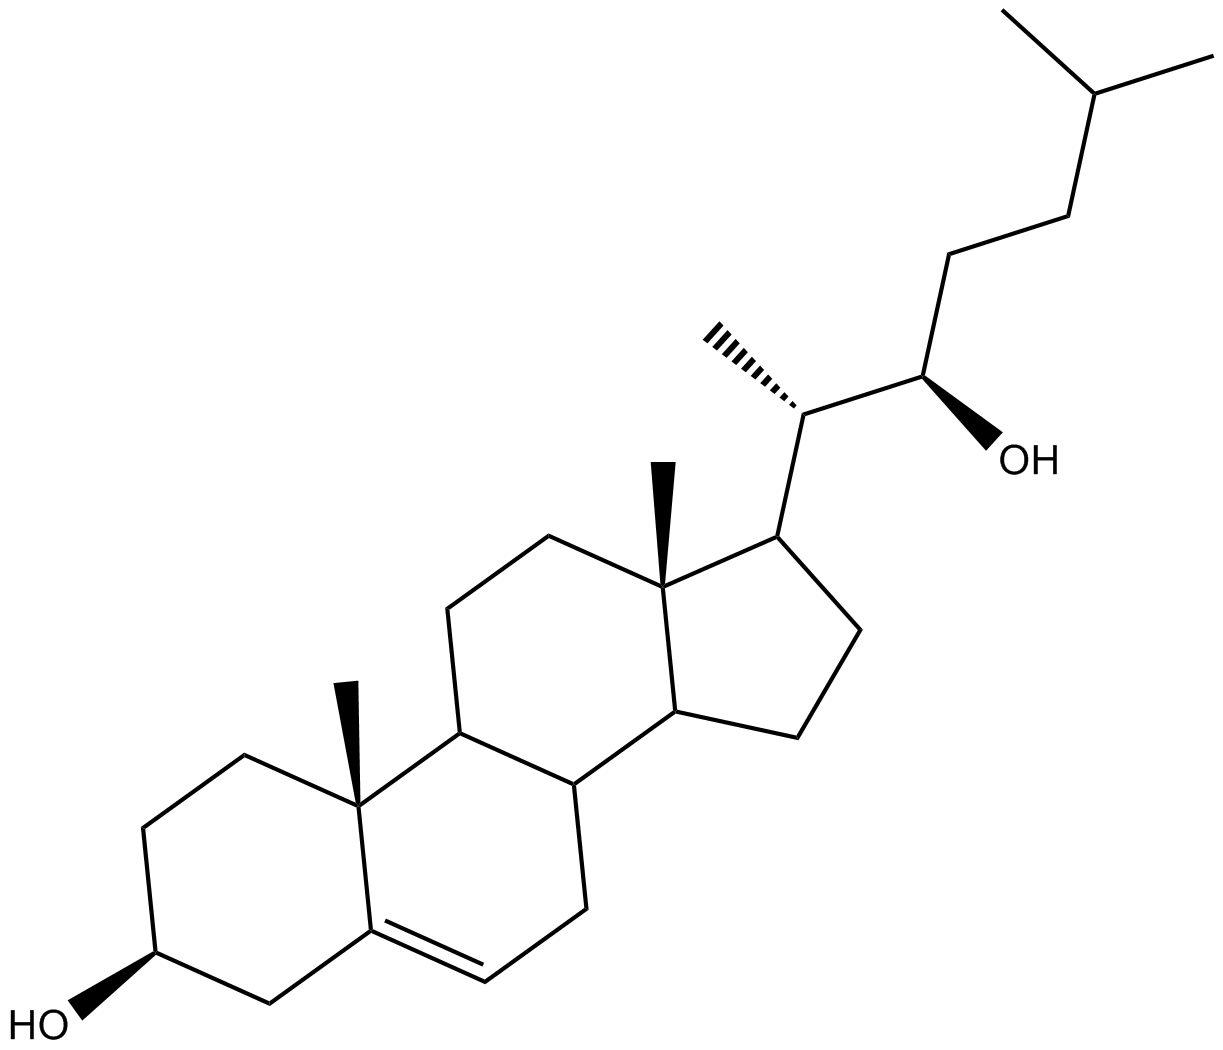 22(R)-hydroxy Cholesterol  Chemical Structure